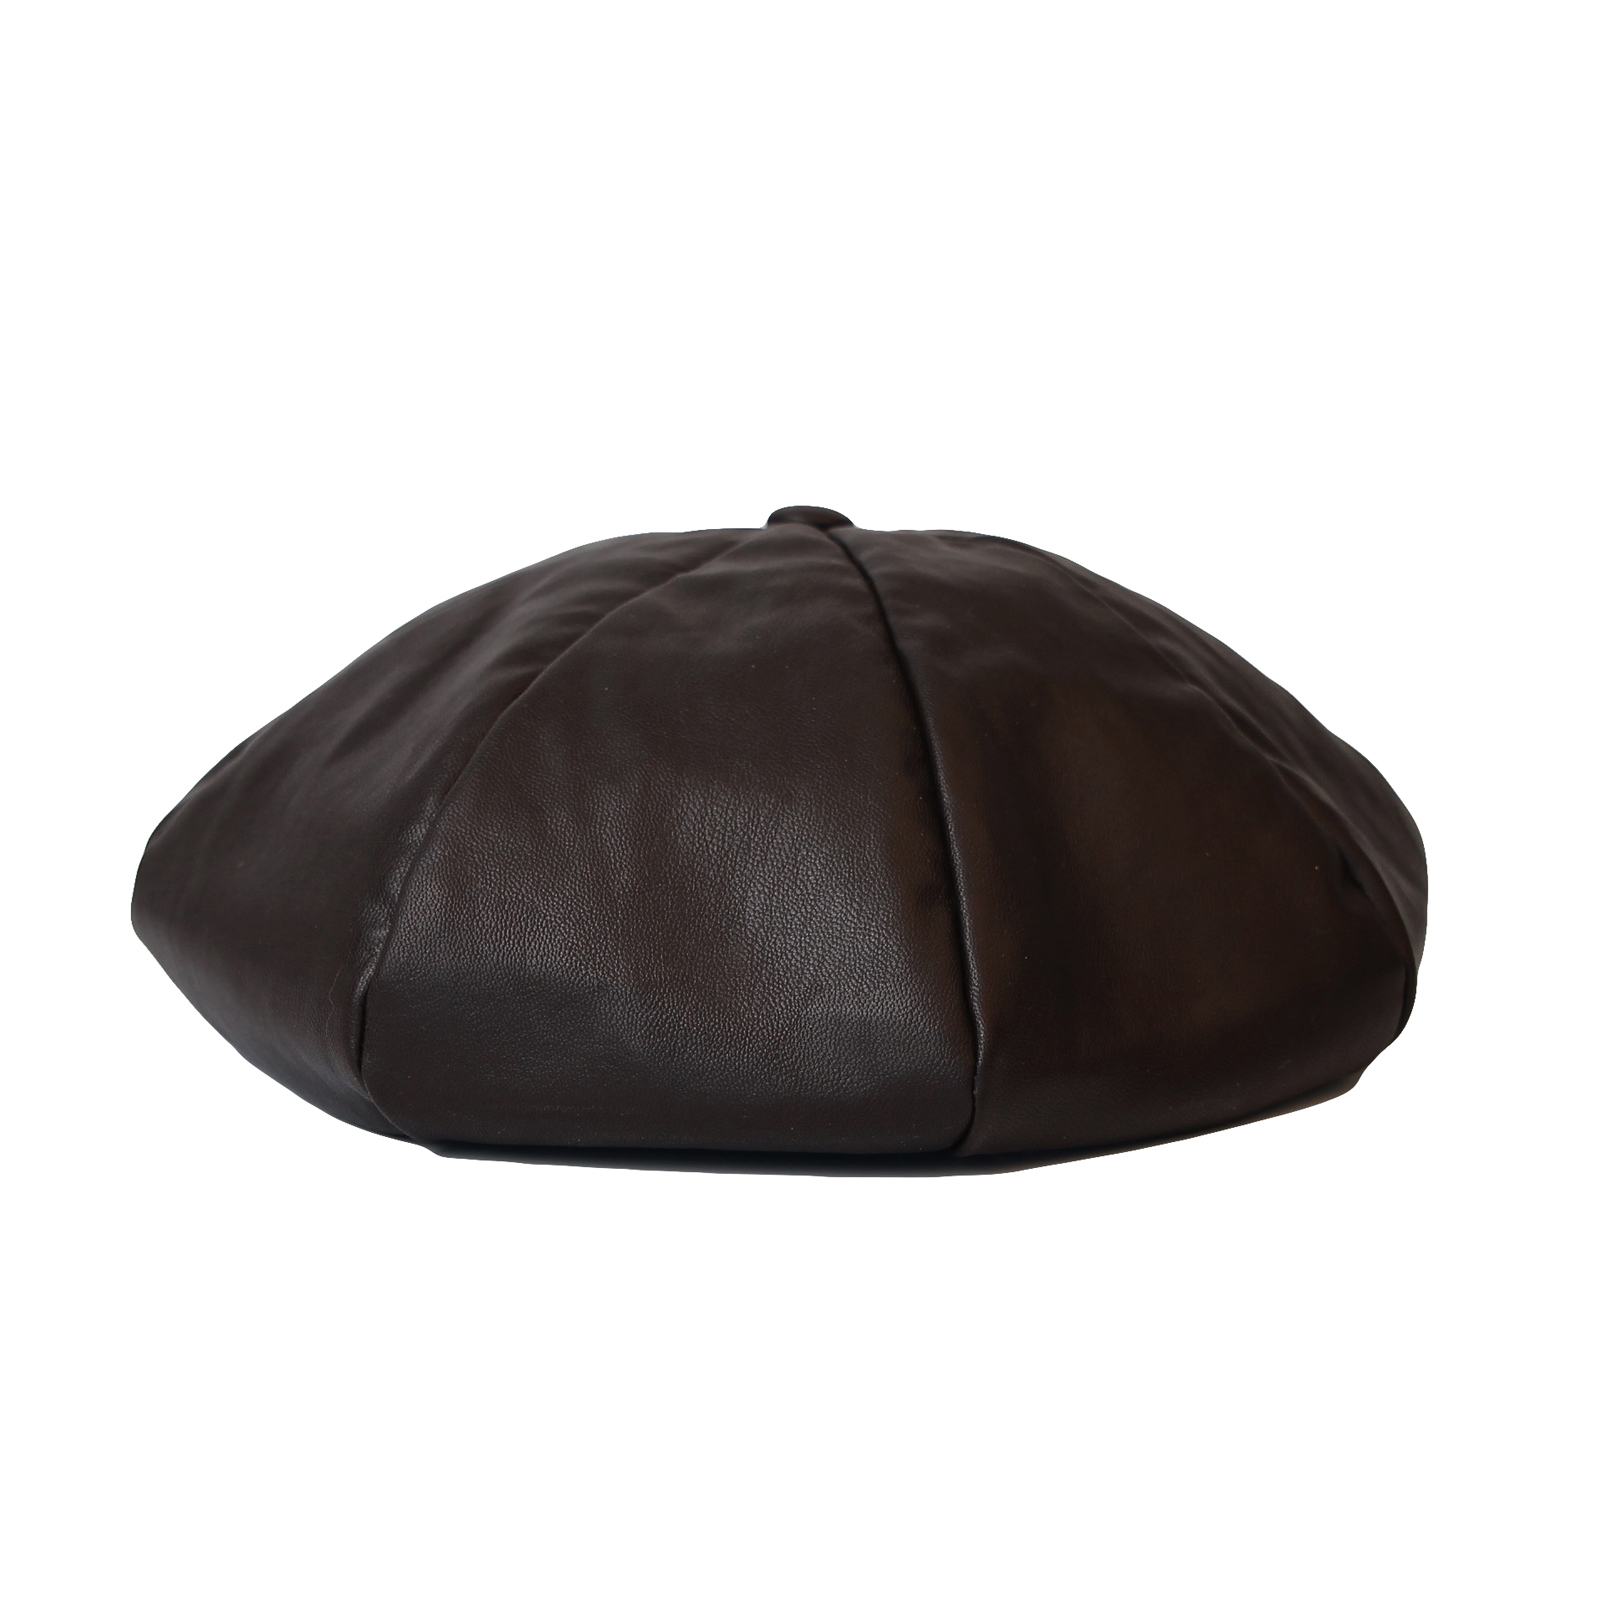 WITHMOONS Newsboy Hat Cabbie Beret Driving Applejack Cap Faux Leather ...